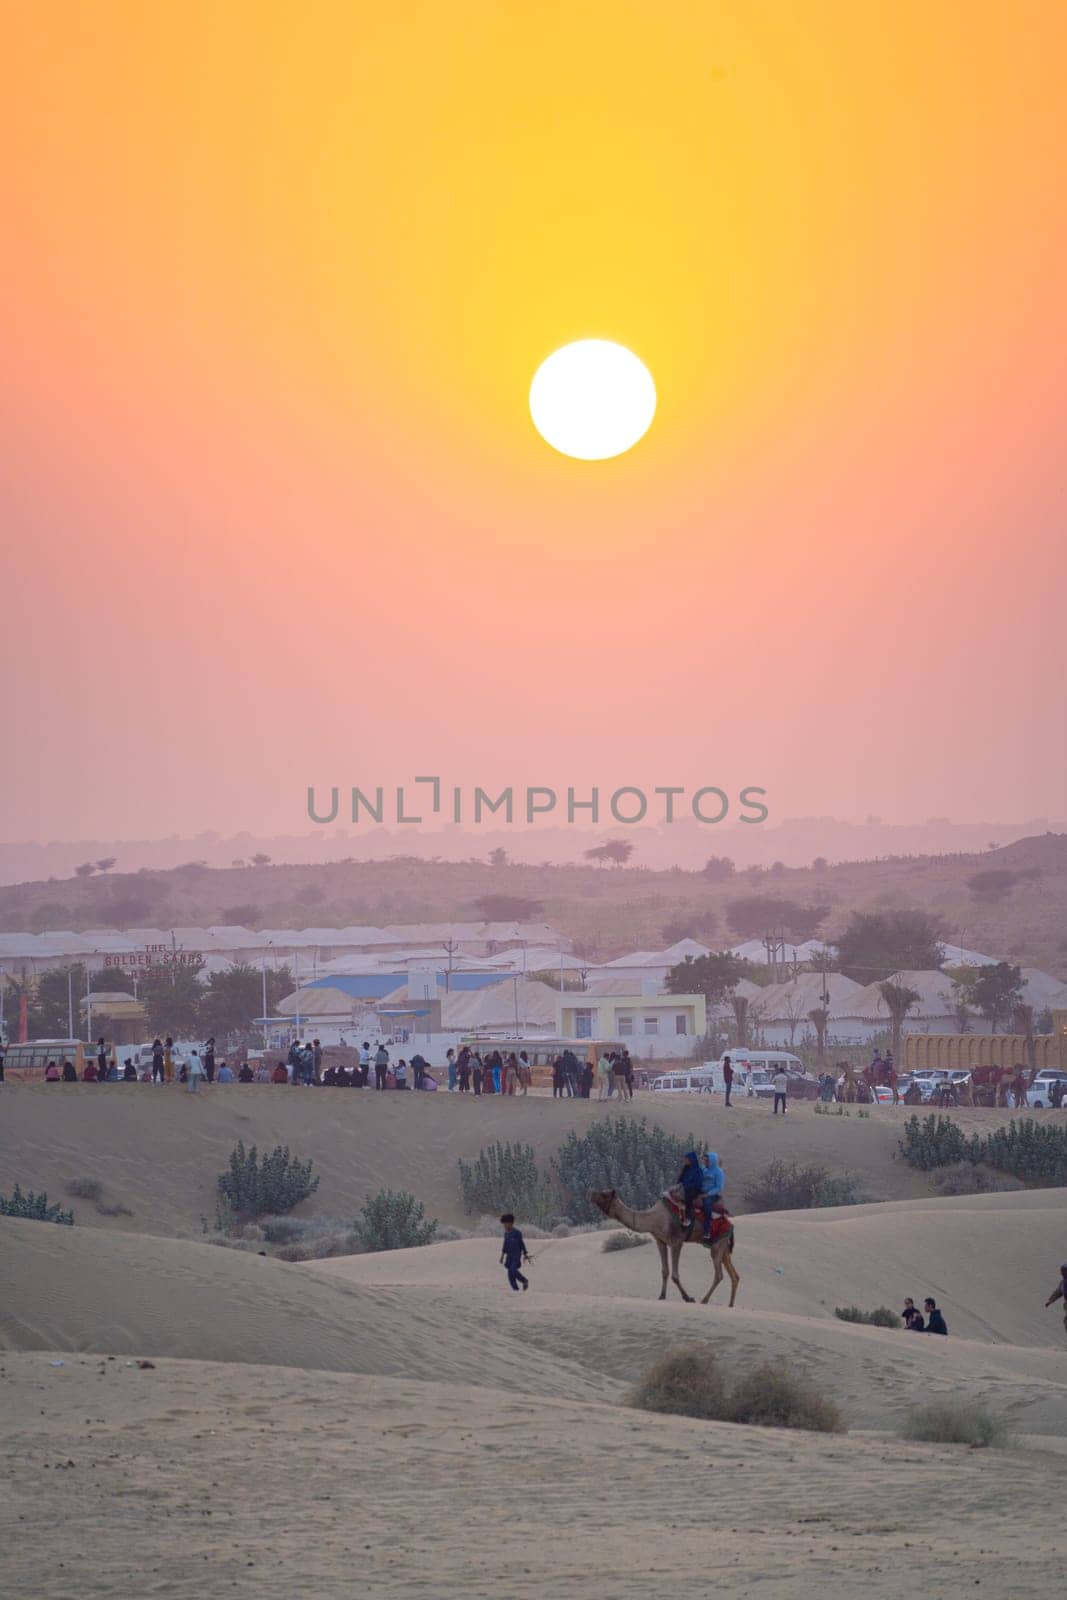 line of camels carrying people tourists at sunset across thar desert in jaisalmer rajasthan showing a popular tourist activity India